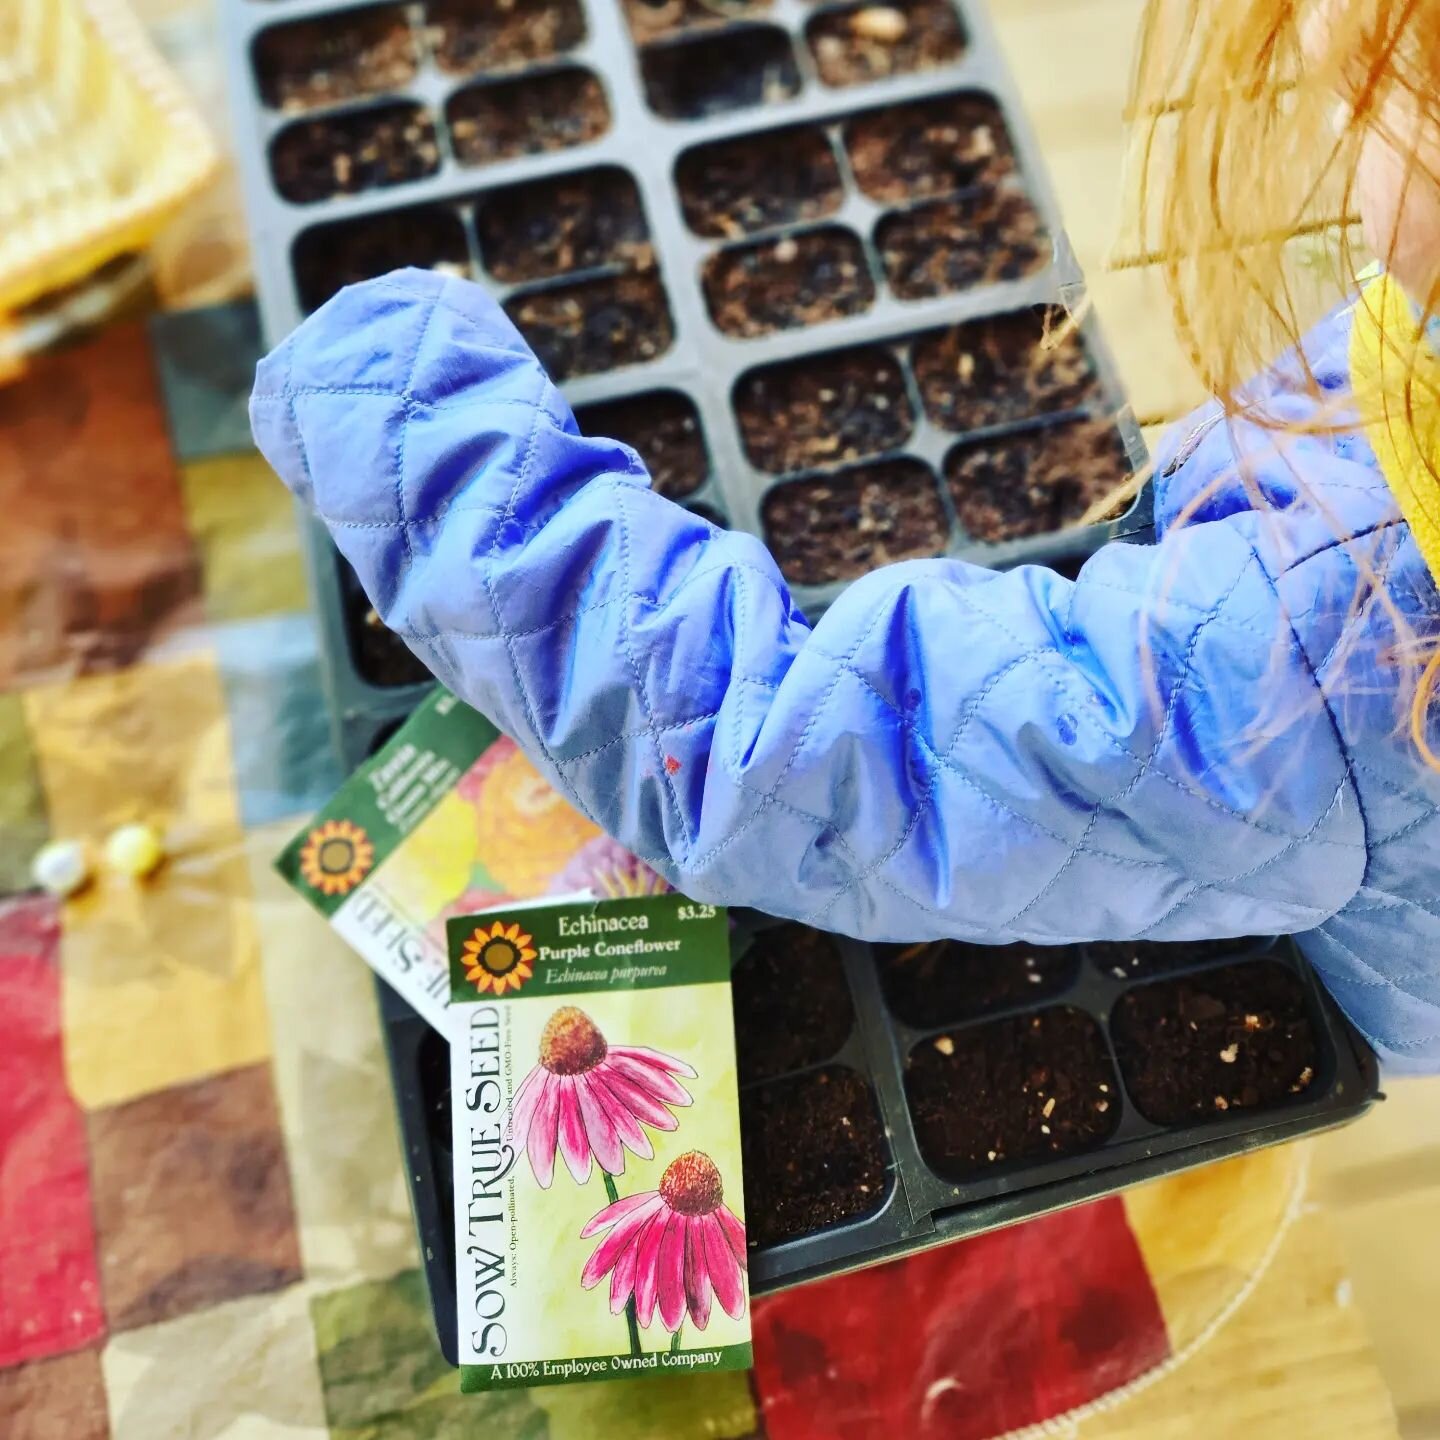 &quot;We need to be earth kind.&quot;
-Earth School student, age 4

The joy of planting time @ The Earth School 🌼 !